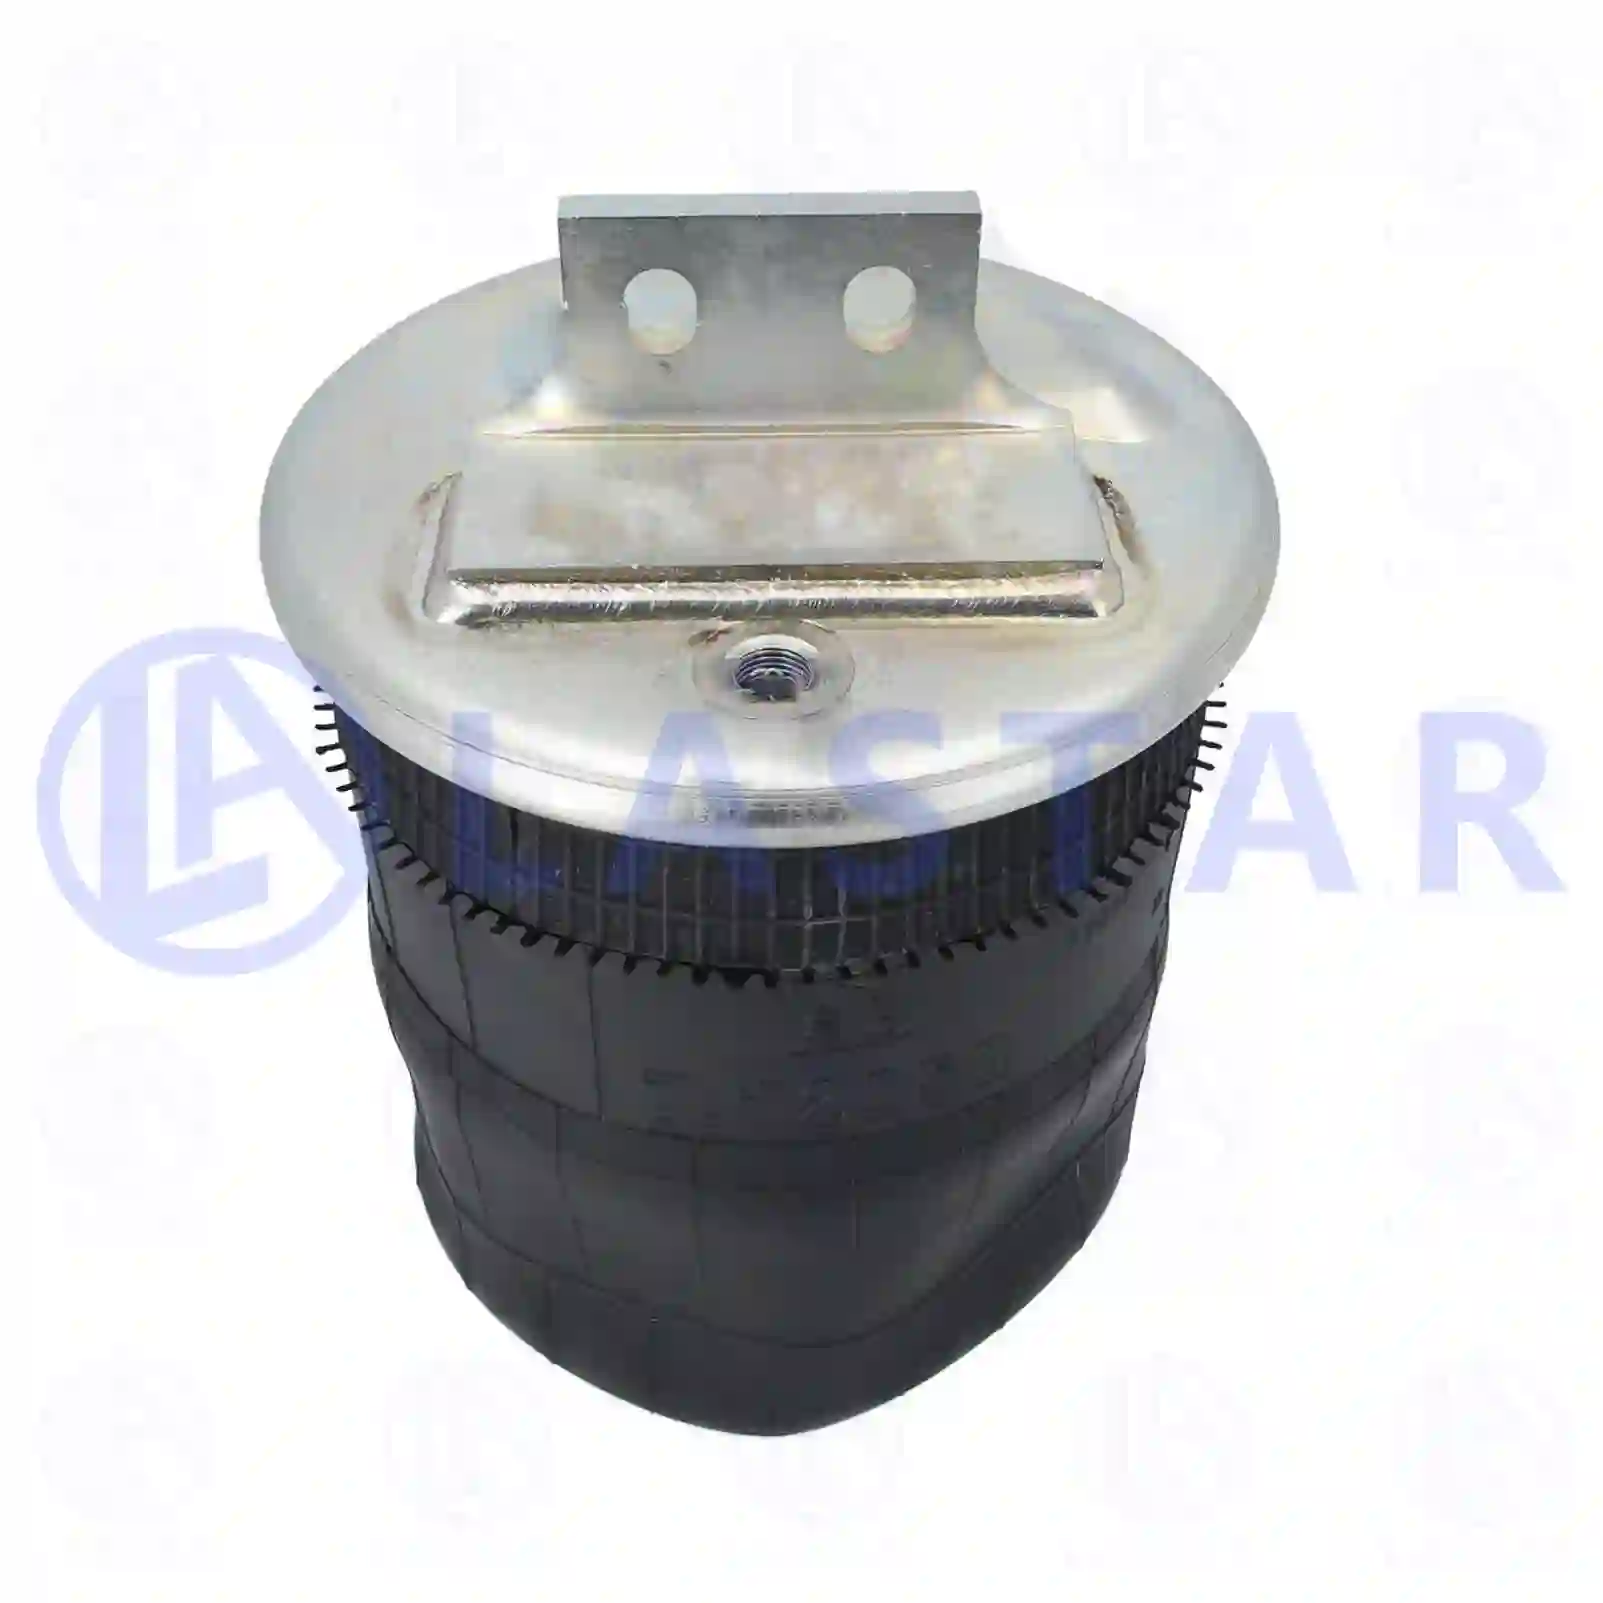 Air spring, without piston, 77729311, 42559765 ||  77729311 Lastar Spare Part | Truck Spare Parts, Auotomotive Spare Parts Air spring, without piston, 77729311, 42559765 ||  77729311 Lastar Spare Part | Truck Spare Parts, Auotomotive Spare Parts